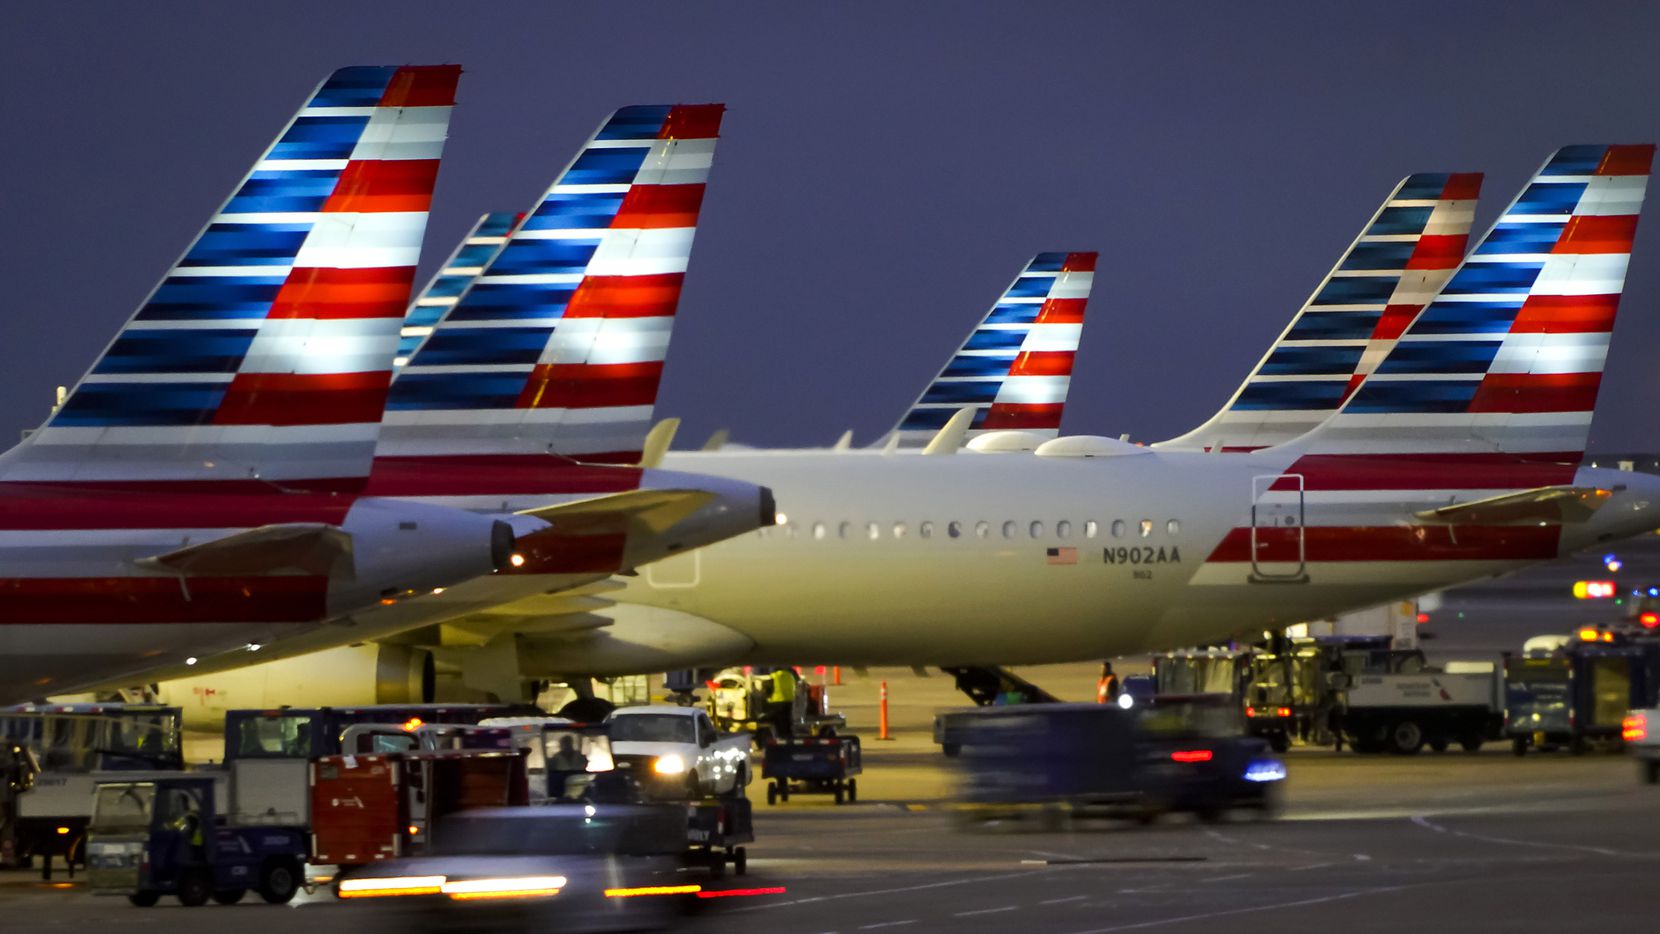 American Airlines planes are seen at the gates of Terminal C at DFW Airport on Friday, Jan. 7, 2022.